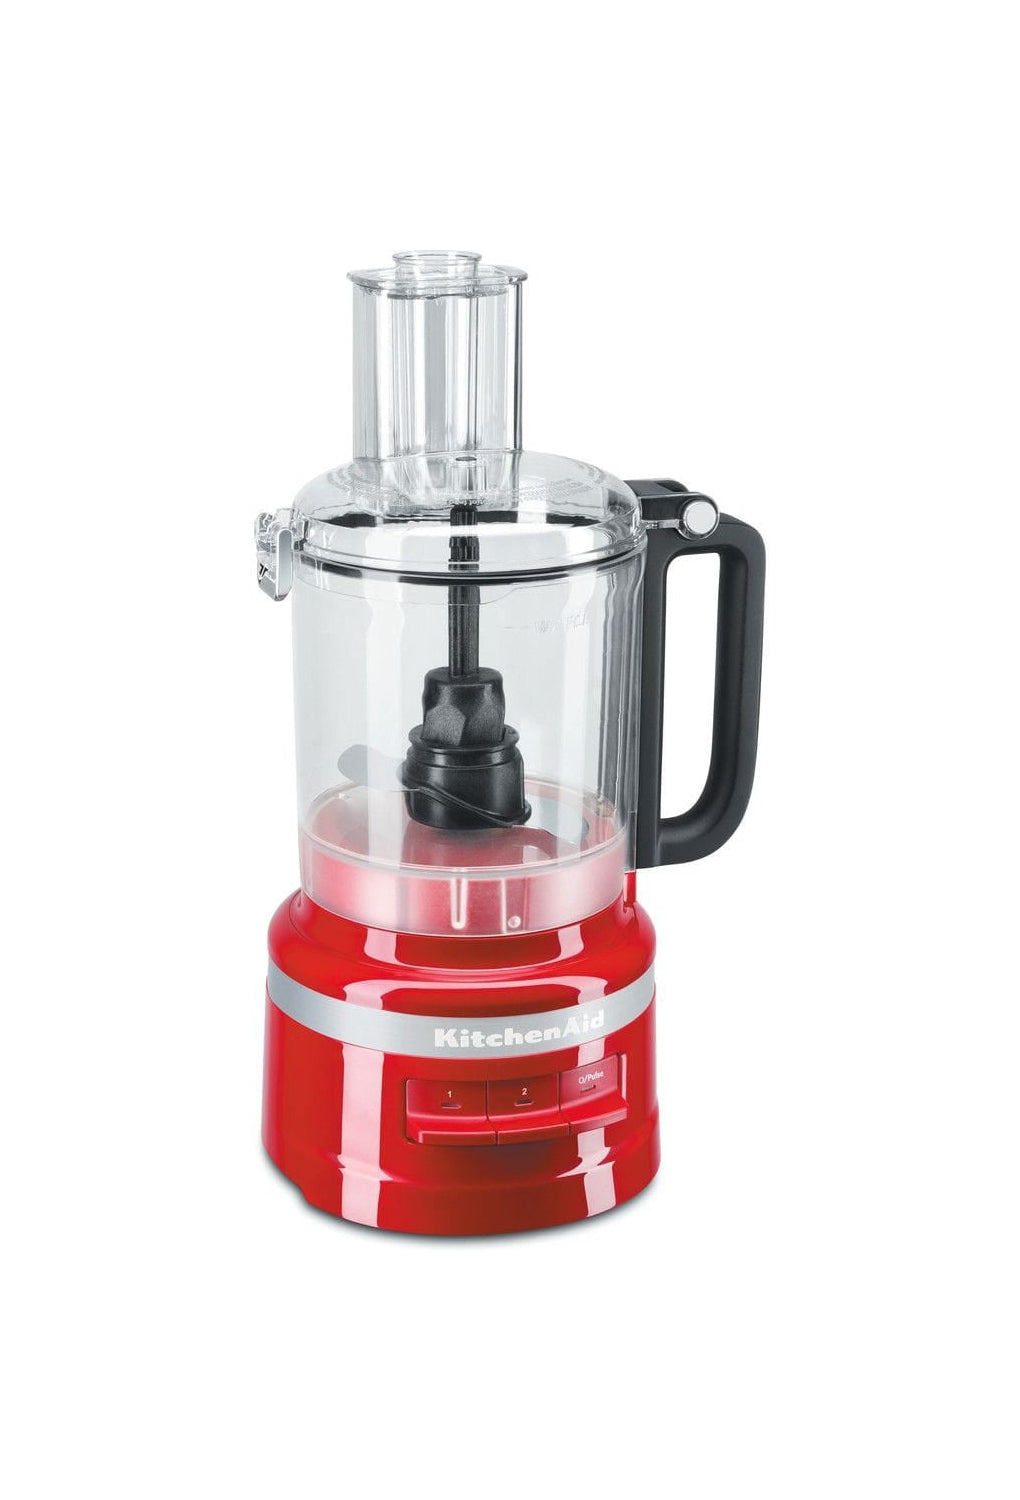 KitchenAid 5 KFP0719 Rytraire alimentaire 2.1 L, Empire Red